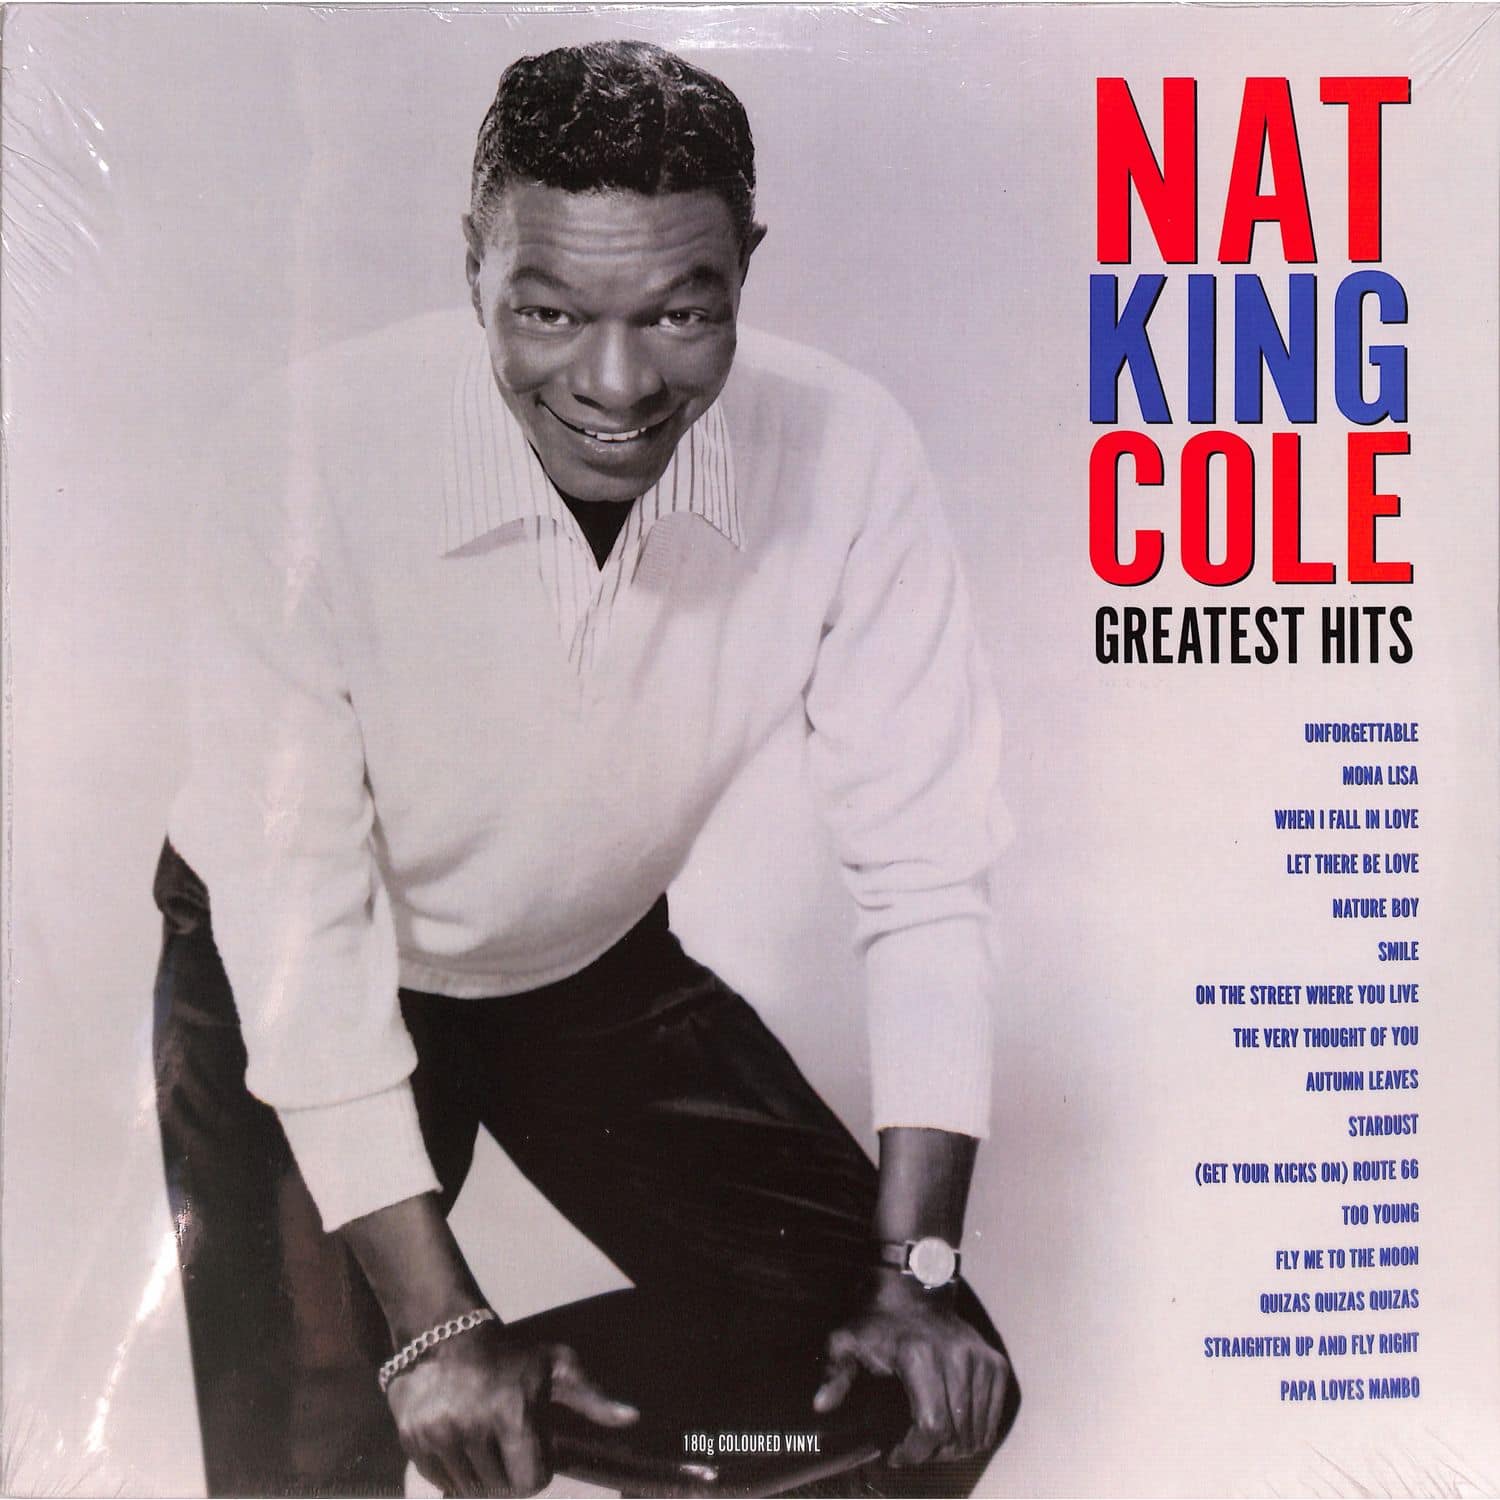 Nat King Cole - GREATEST HITS 